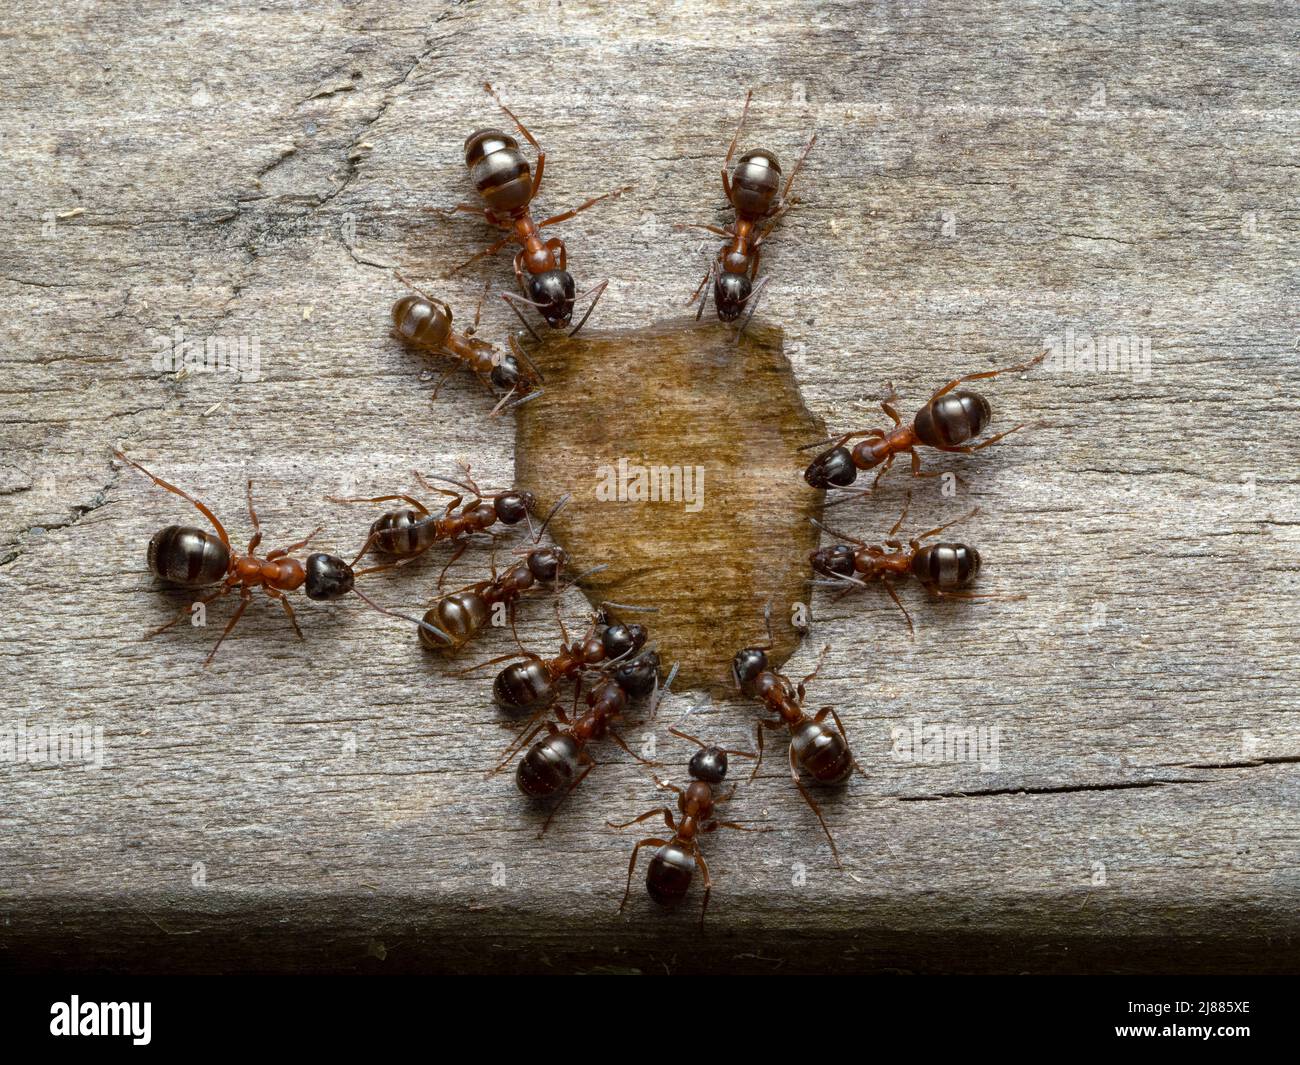 a group of different sizes of carpenter ants, Camponotus vicinus, on wood and drinking from a drop of honey, from above Stock Photo